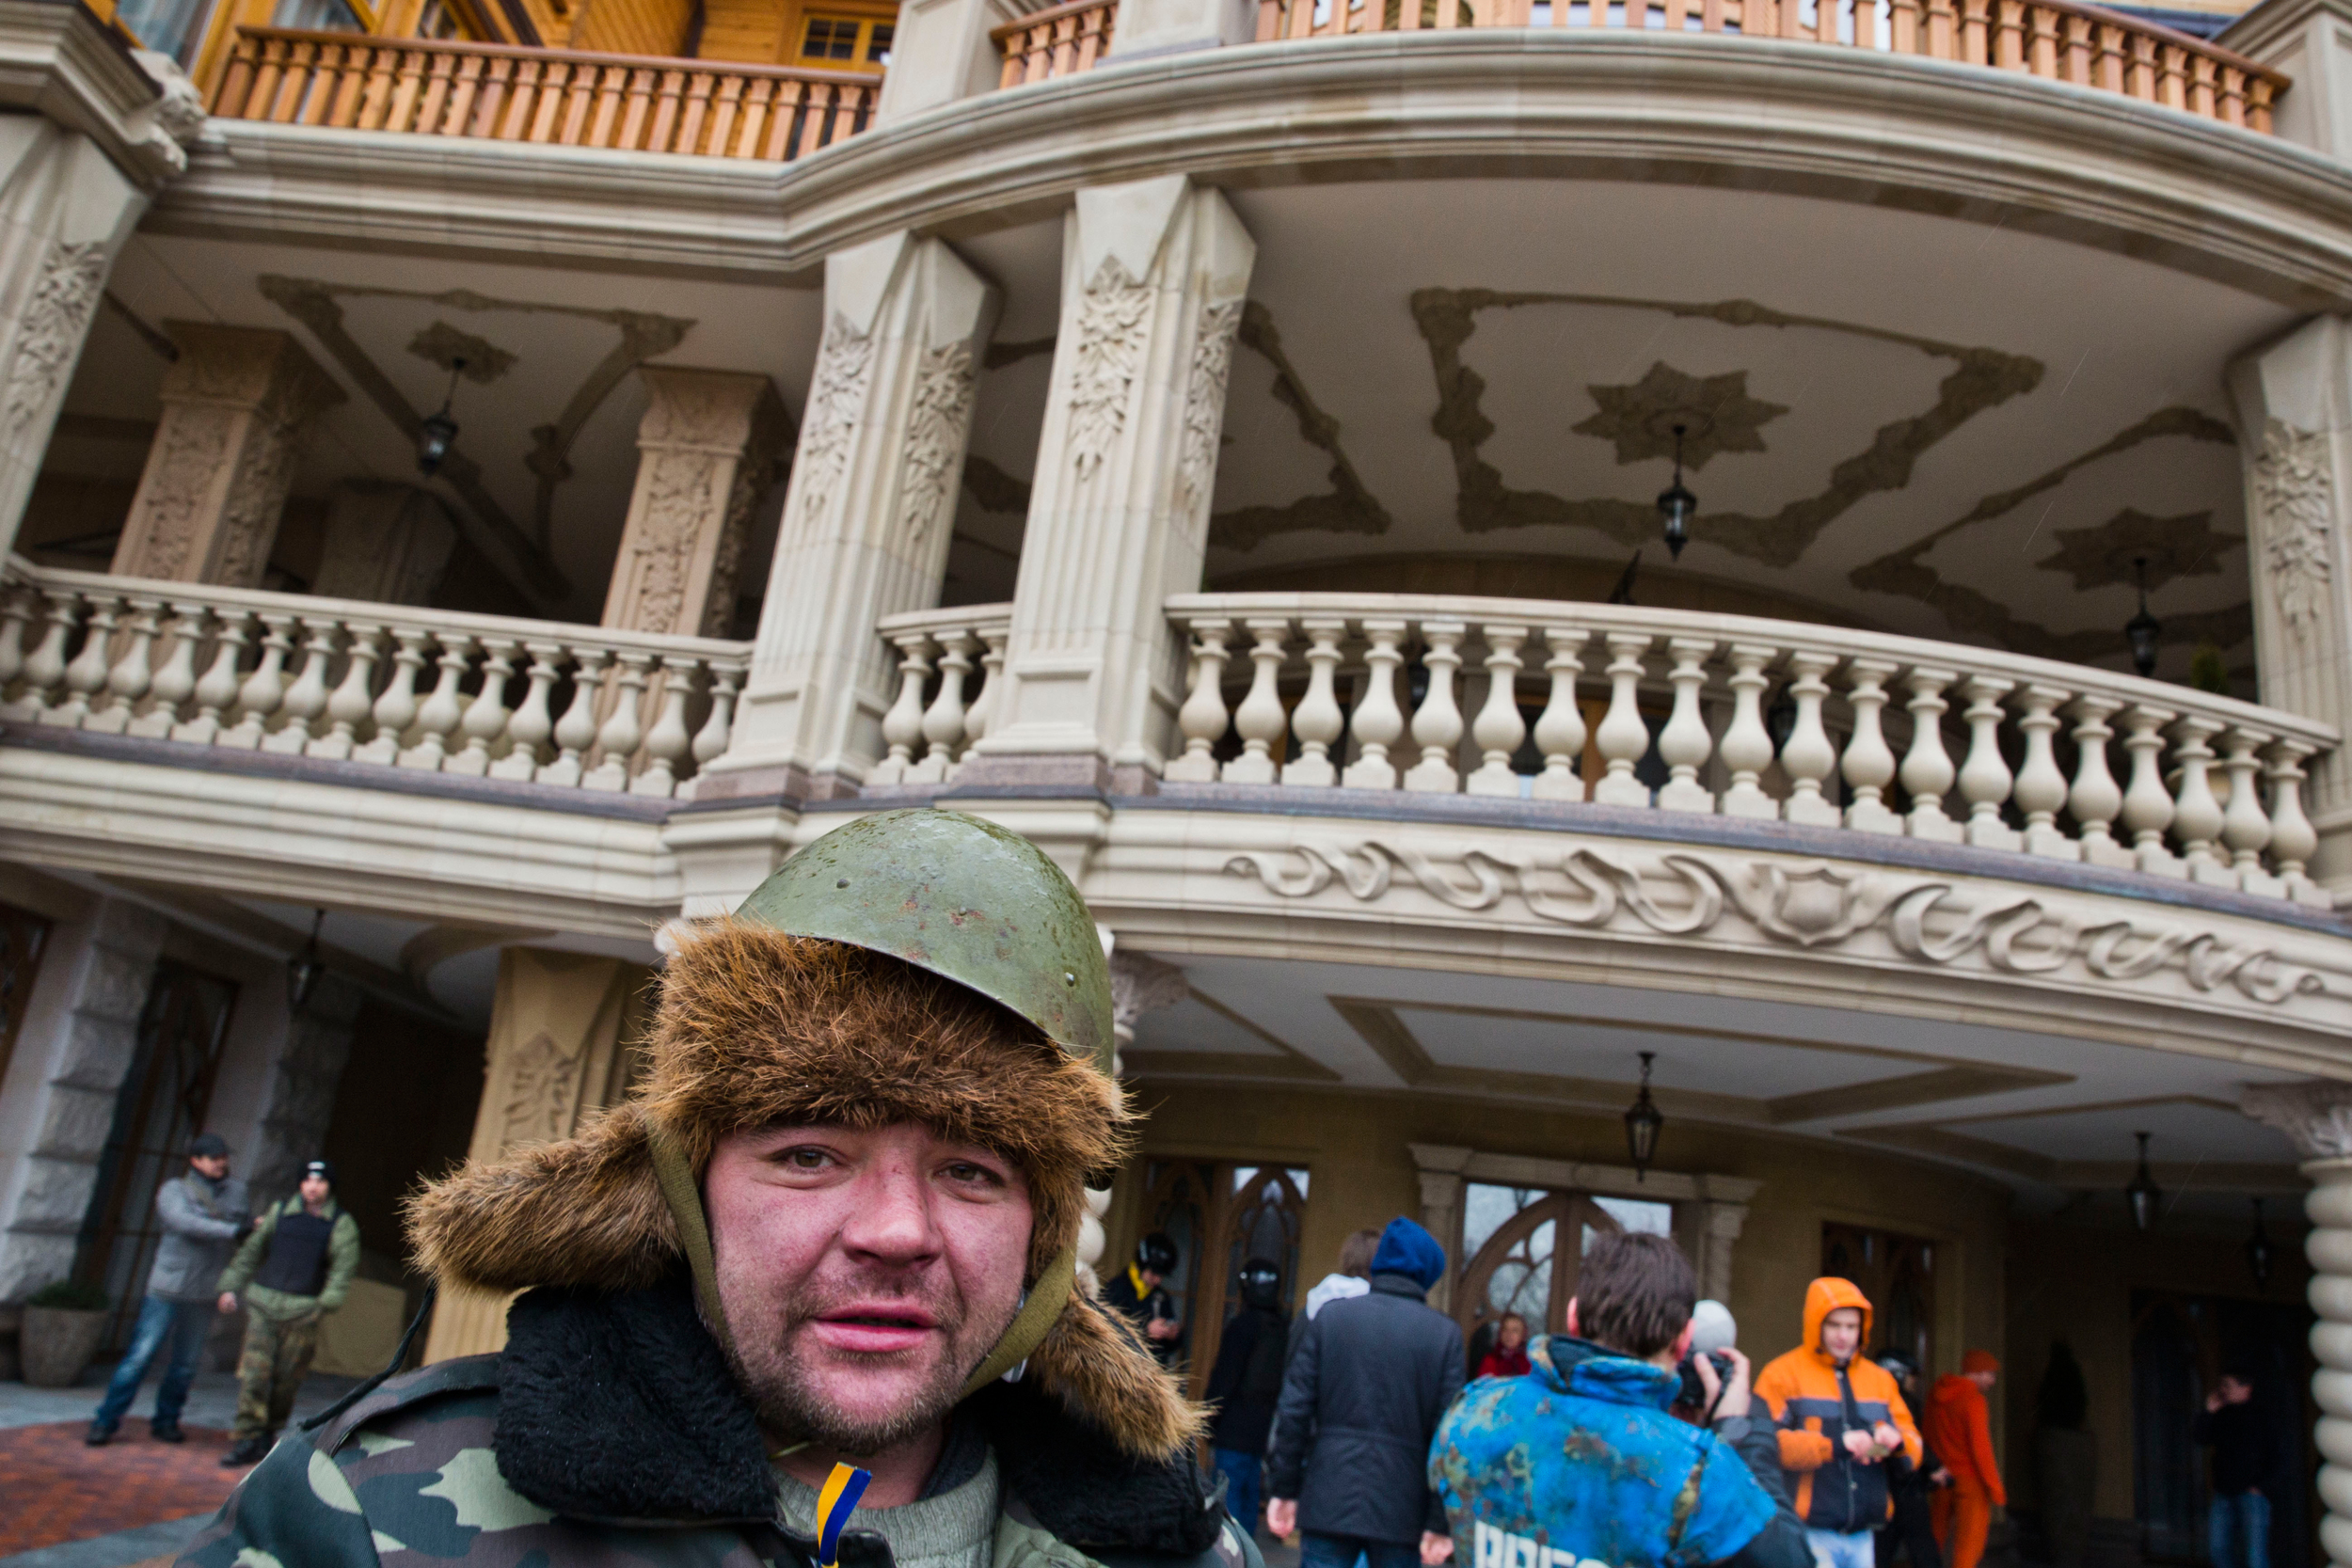  Protesters explore Ukrainian president Yanukovich's fancy residence Mezhihirya after he fled the country 